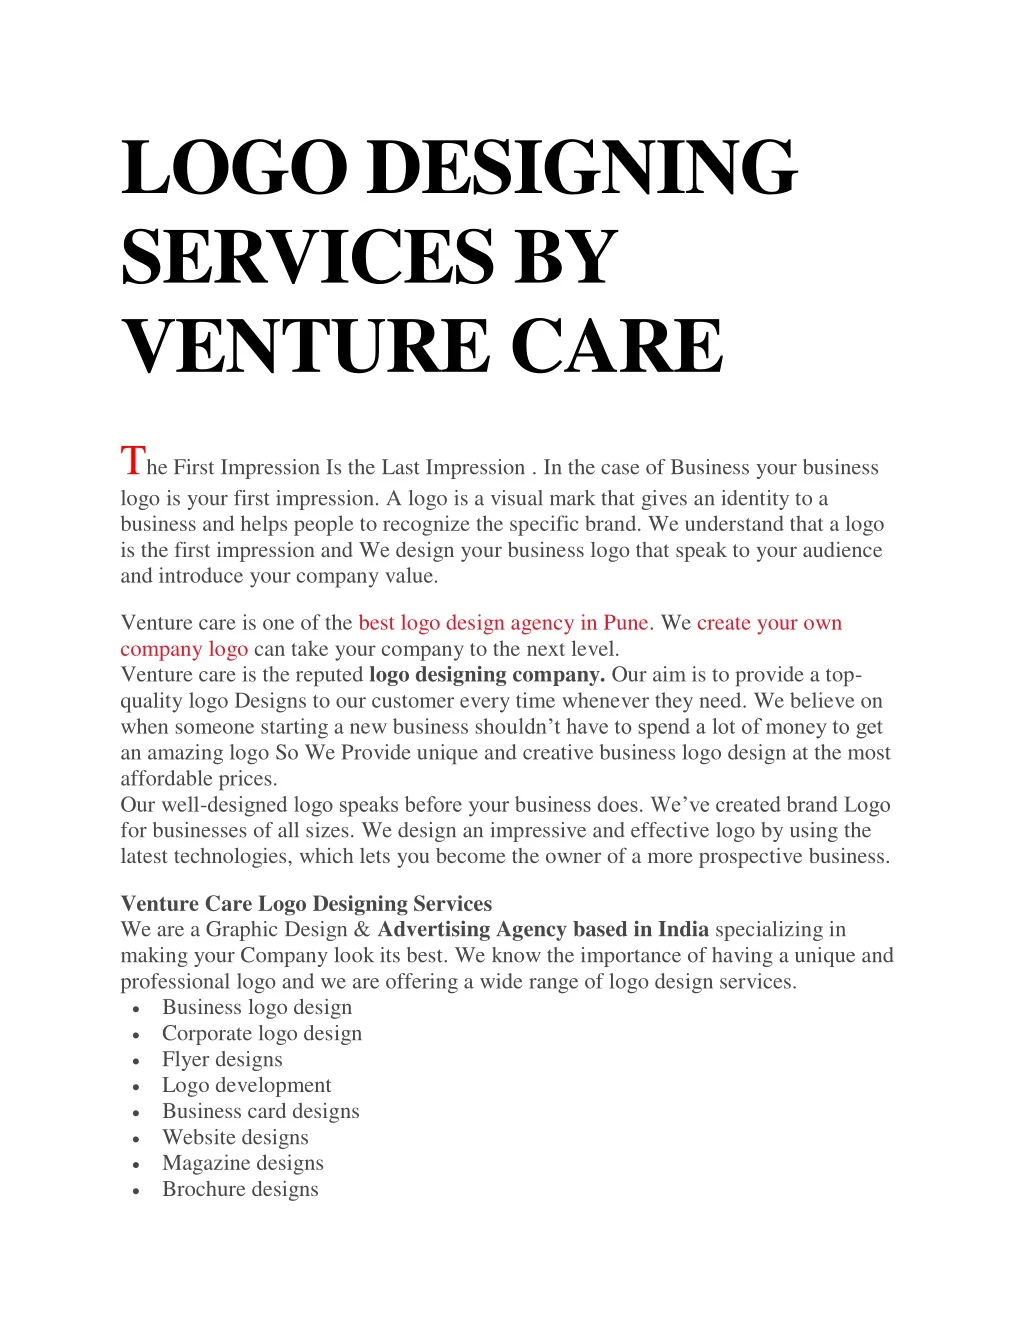 logo designing services by venture care